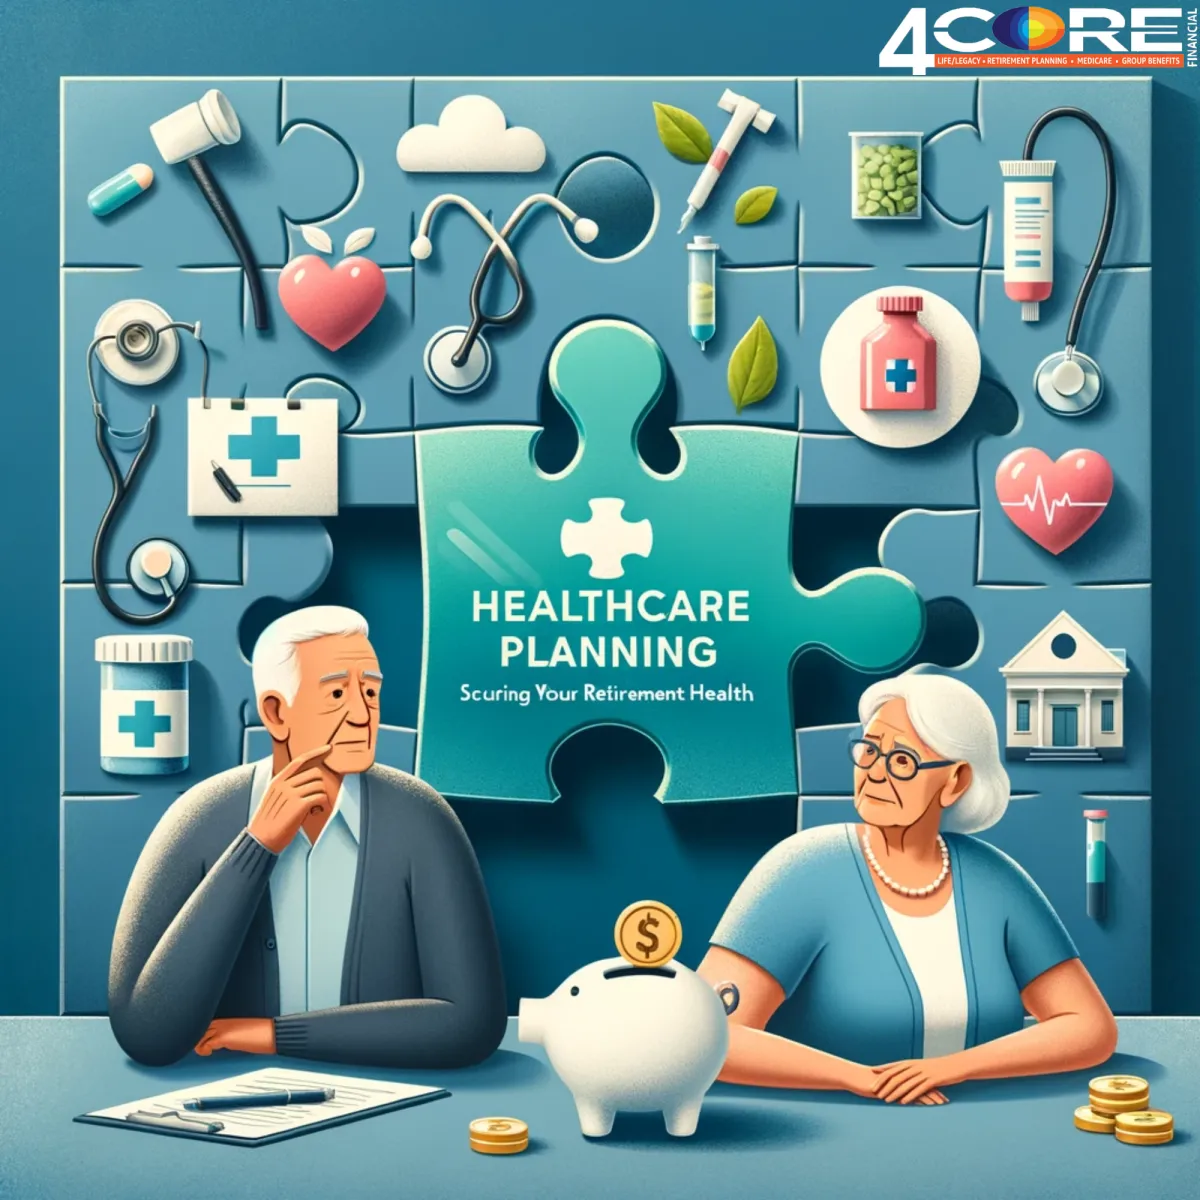 The image features a serene elderly couple in the foreground, thoughtfully looking at a puzzle piece shaped like a medical symbol, representing Medicare. This piece is fitting into a larger puzzle that depicts various healthcare elements like a stethoscope, prescription bottles, dental care, vision care, and a long-term care facility. 